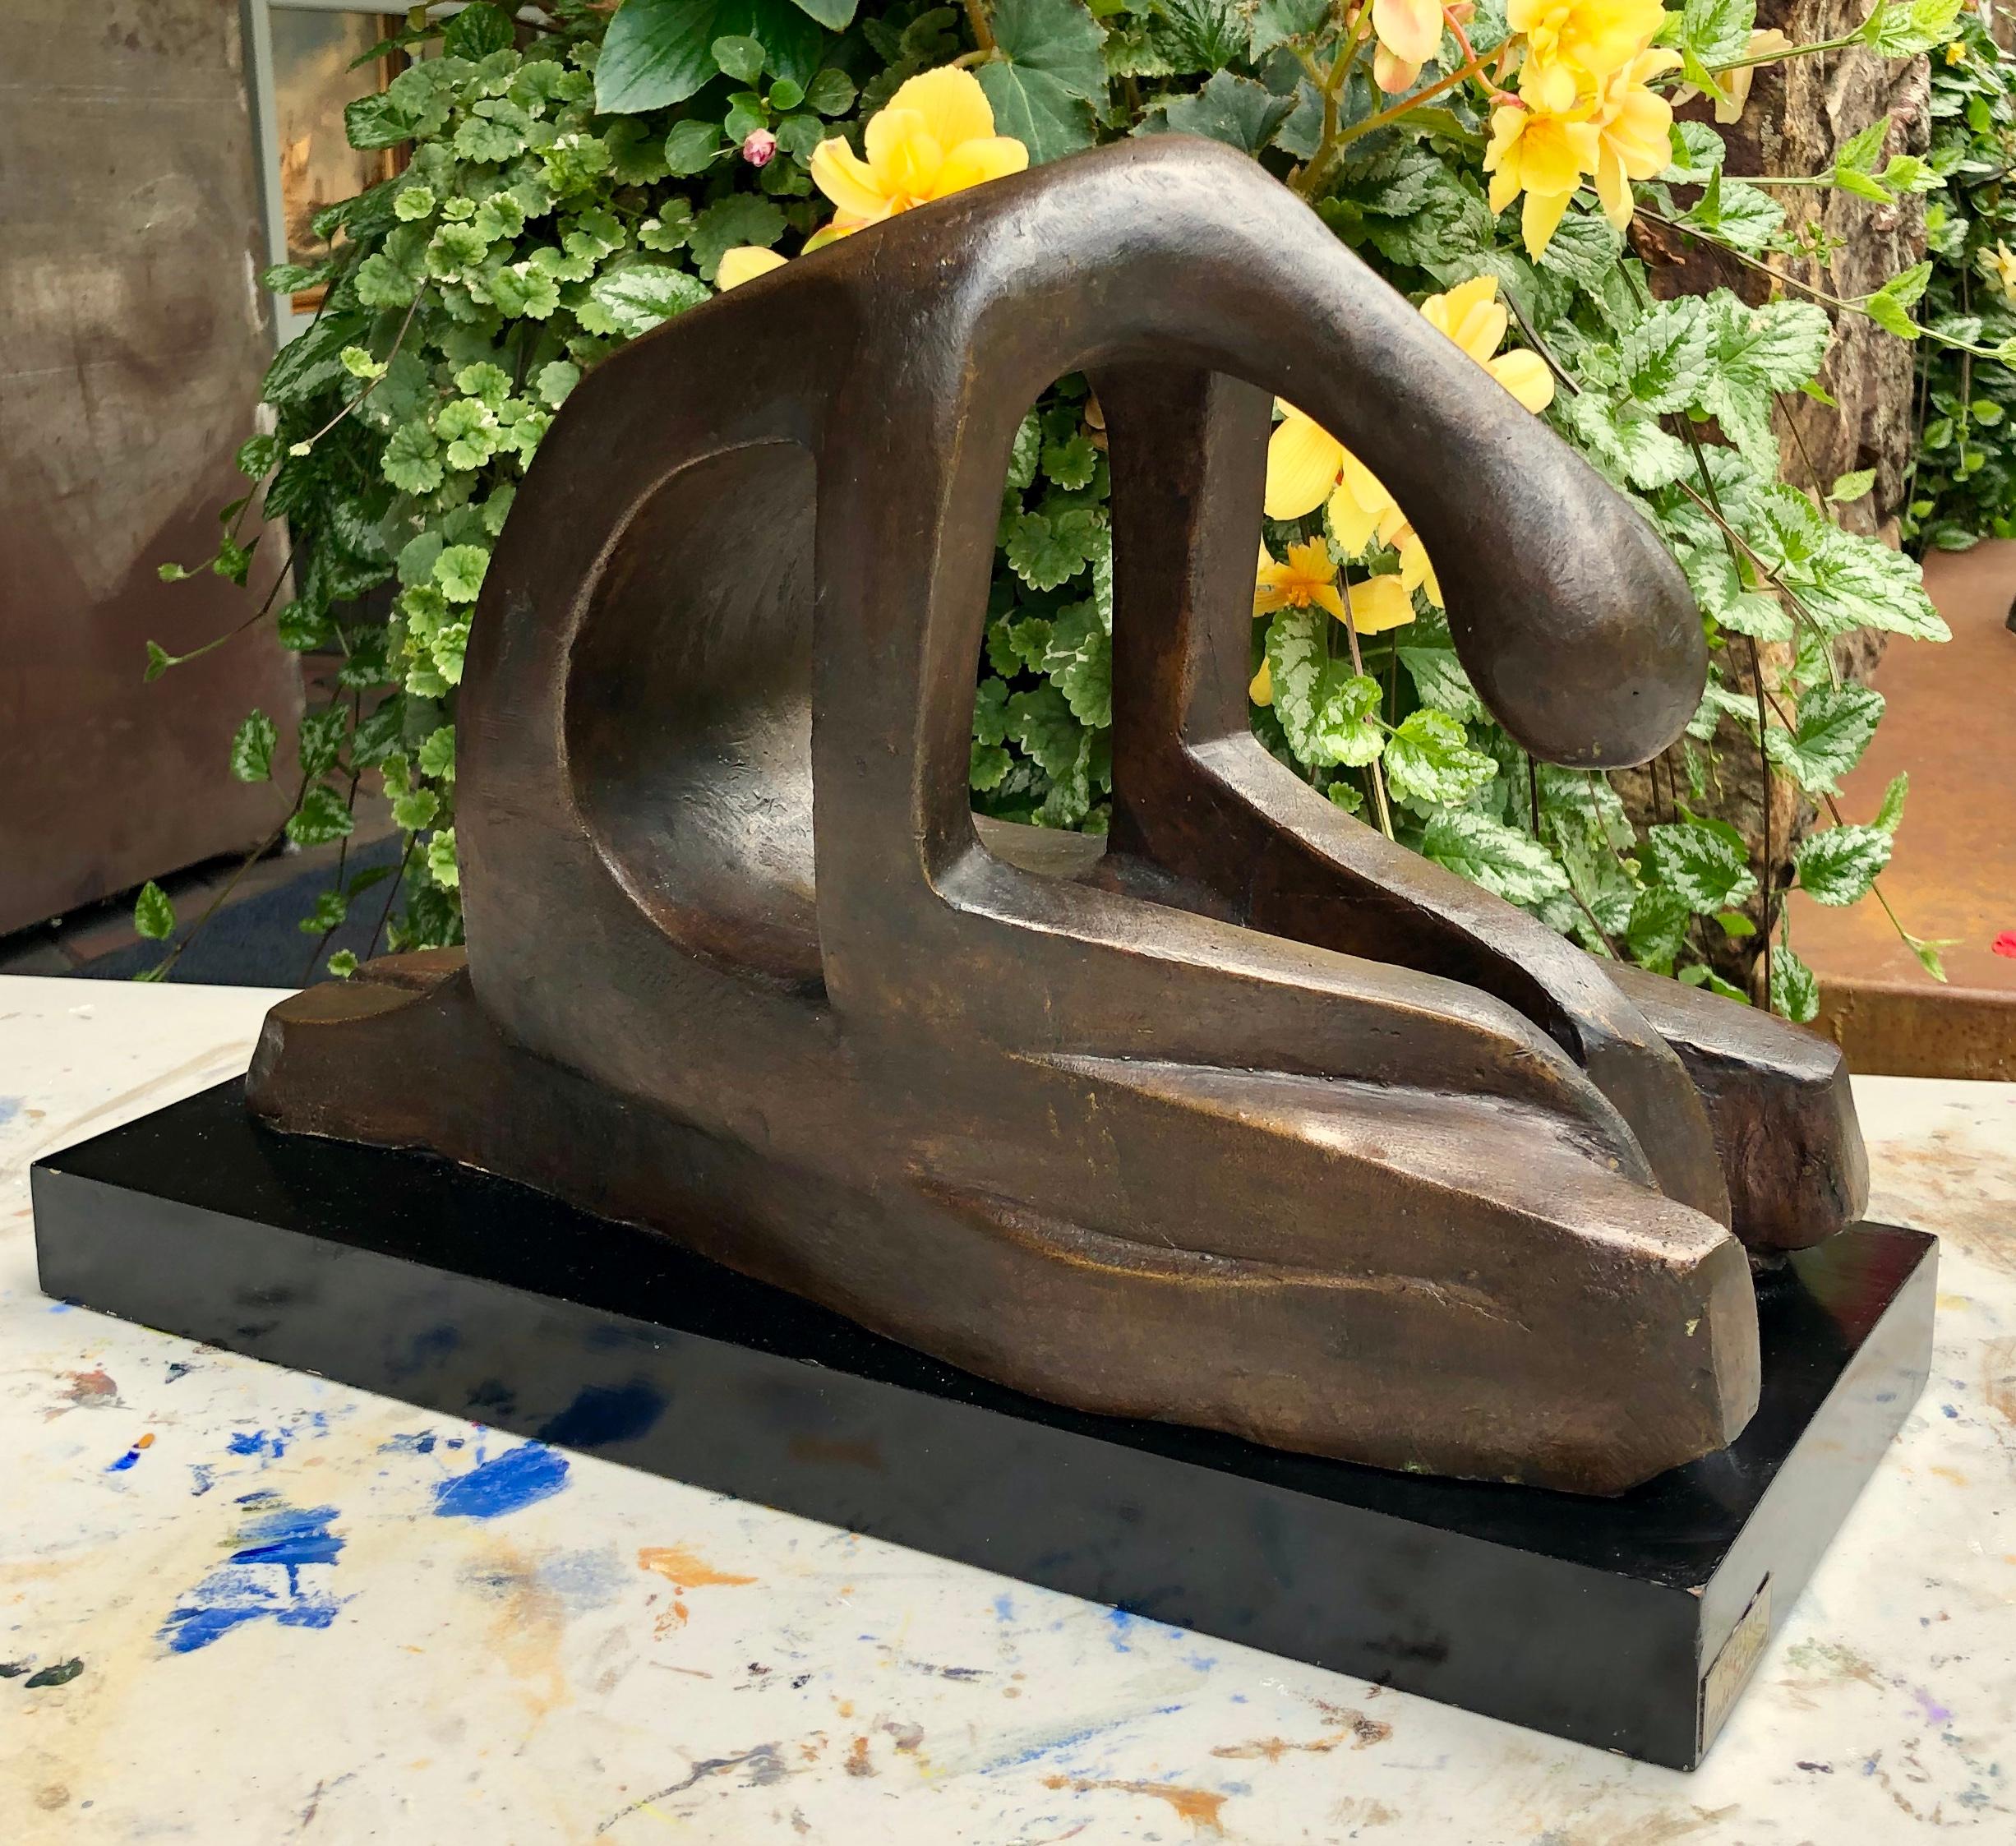 This is the maquette for the larger work displayed at Shadyside Hospital in Pittsburg. Signed on the left leg.

Victor Salmones (1937-1989) was the most widely known sculptor living and working in Mexico during his lifetime. His sculptures won him